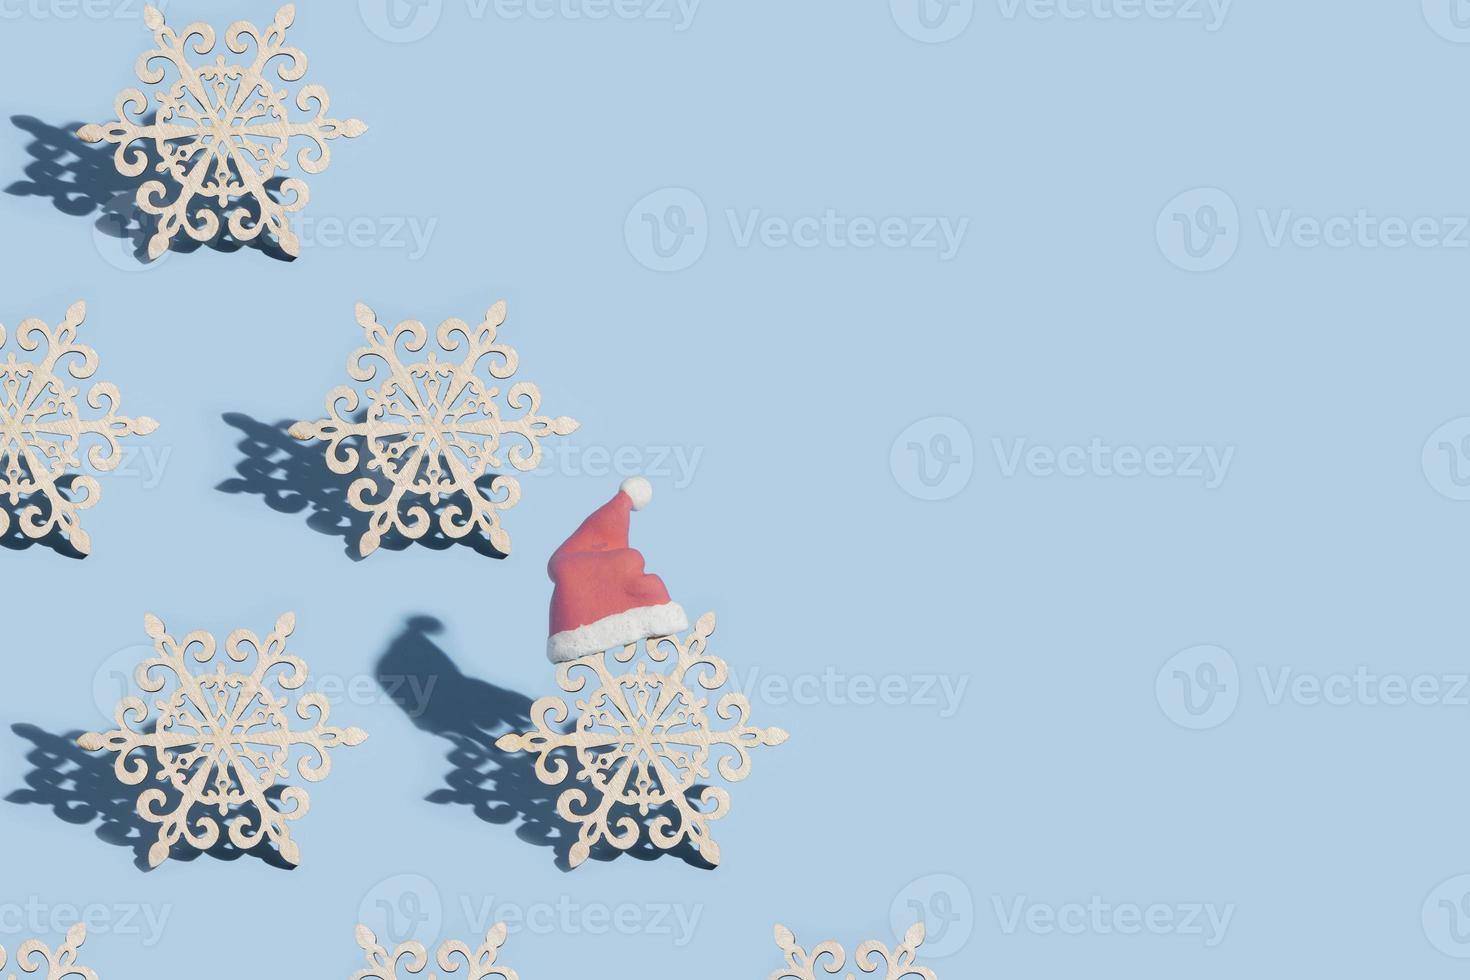 A pattern of snowflakes, one of which is wearing a Santa hat, on a blue background photo